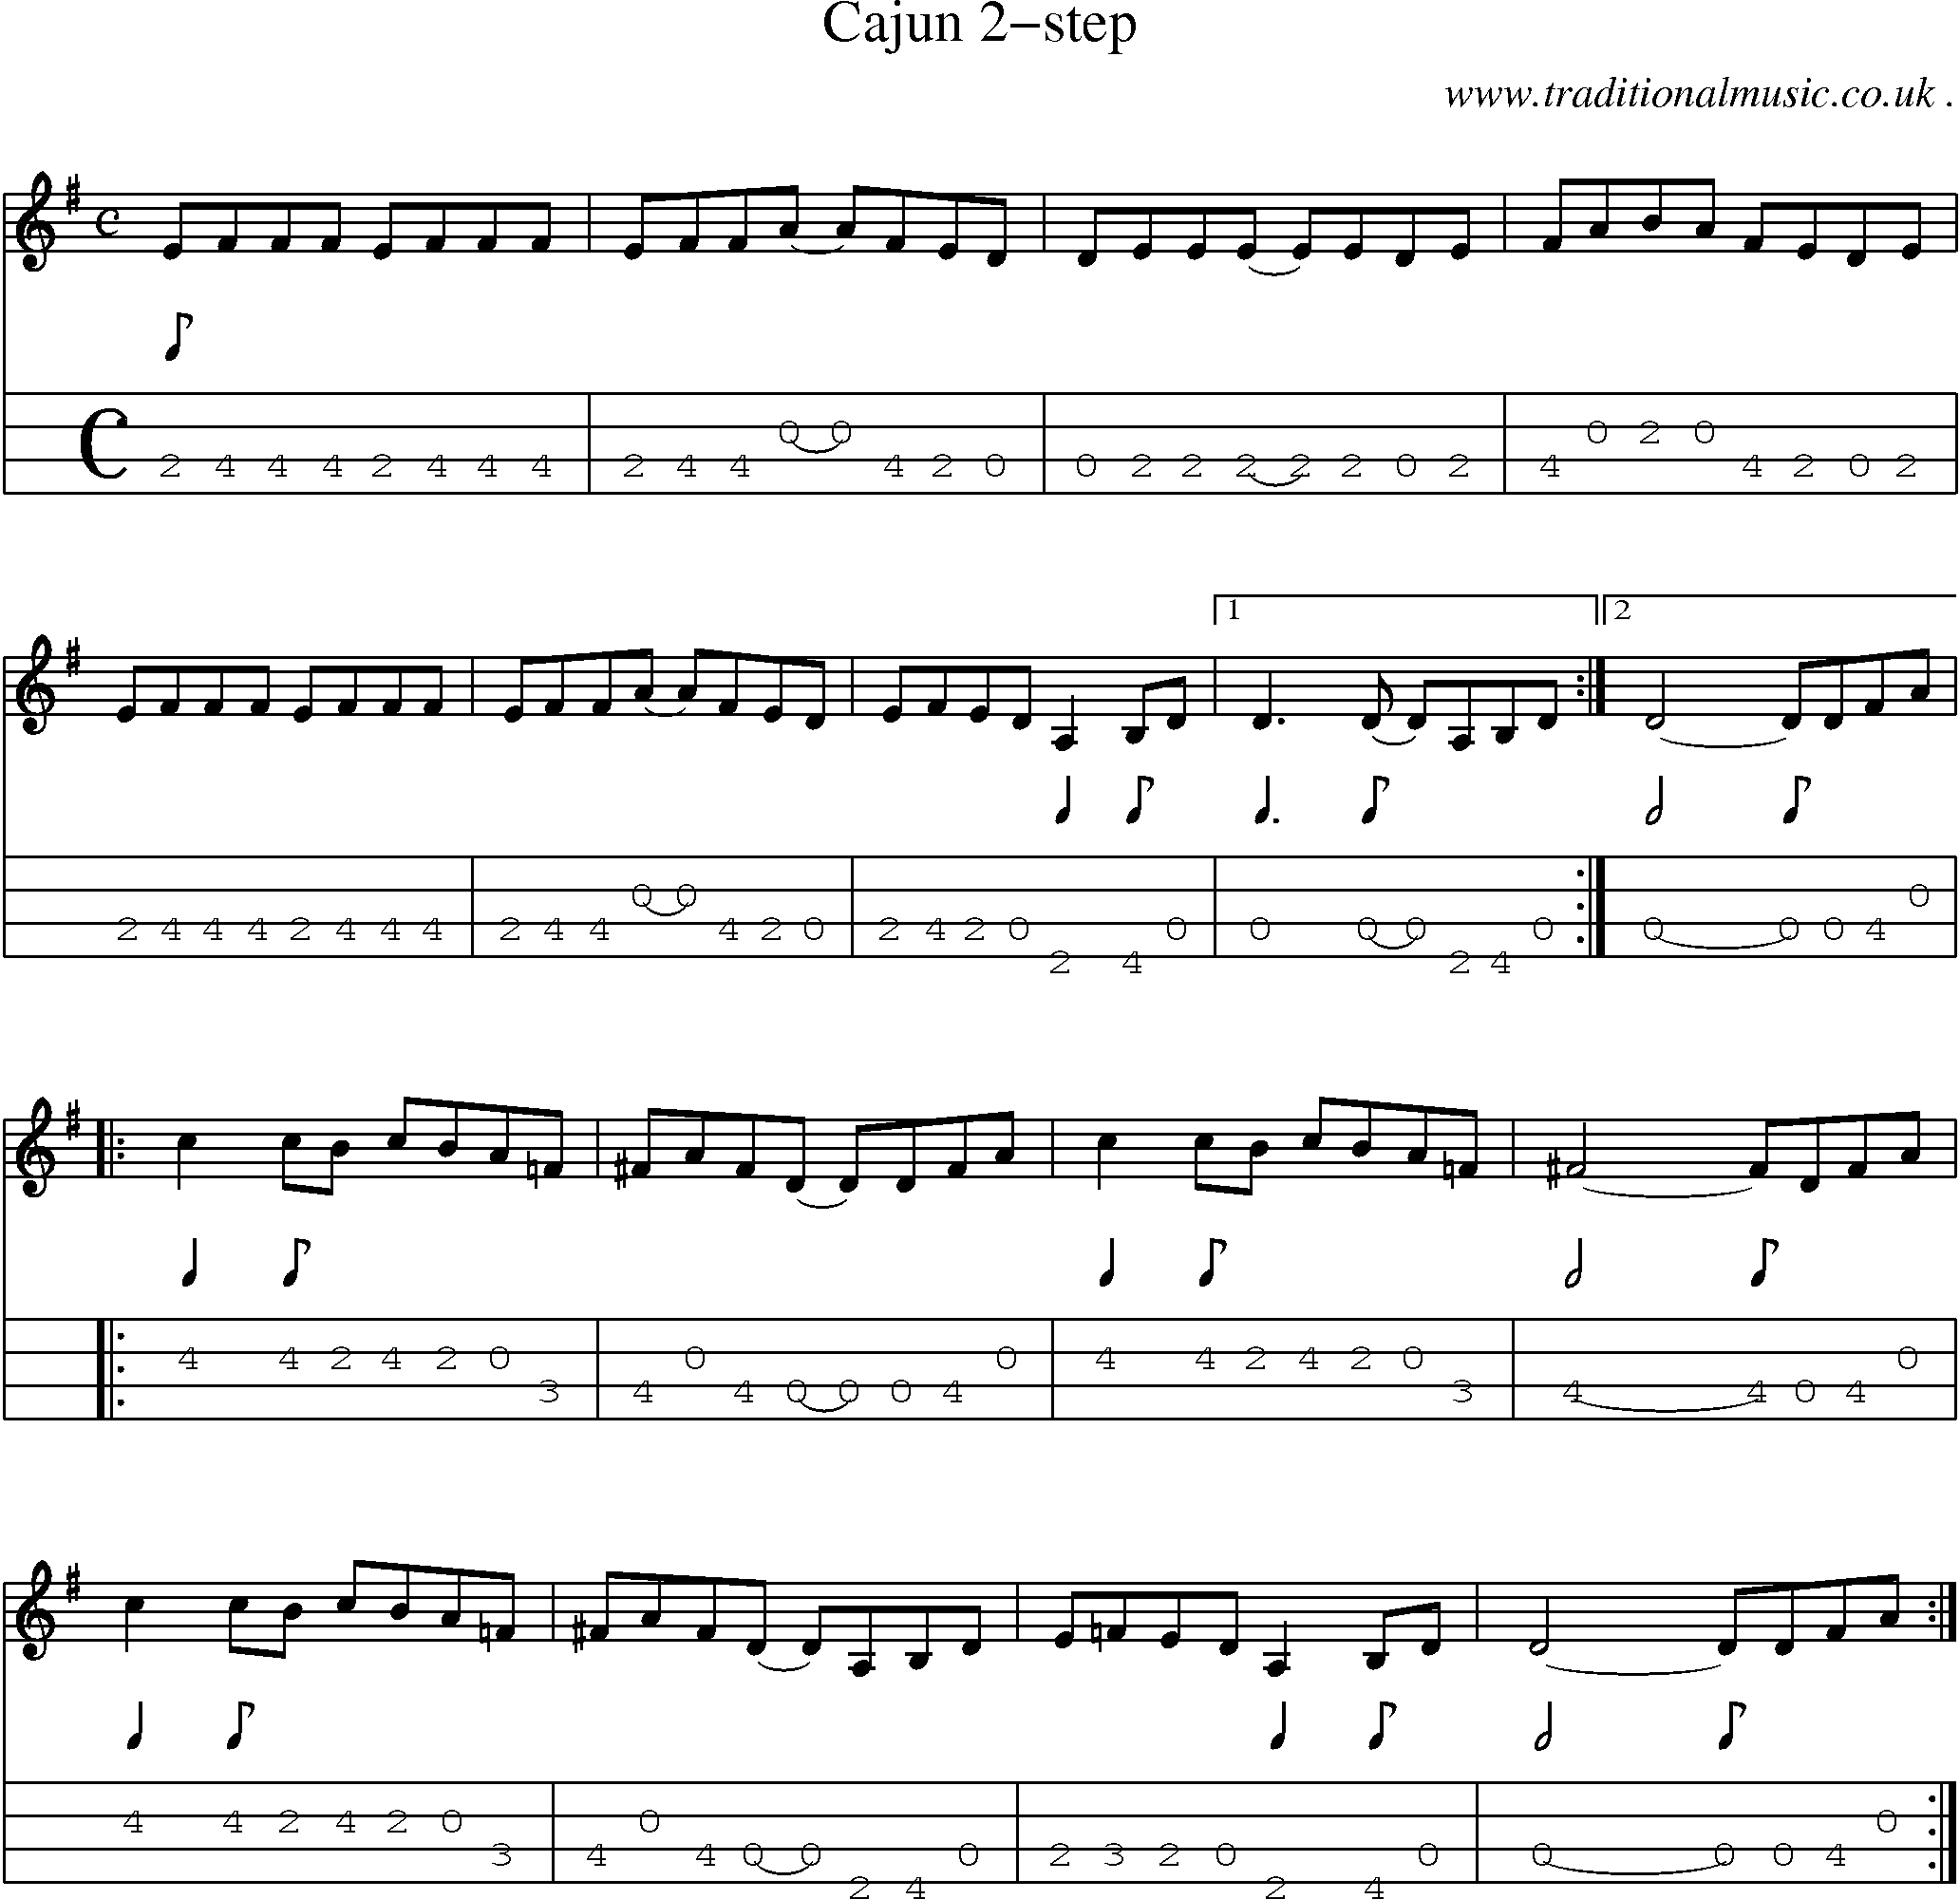 Music Score and Mandolin Tabs for Cajun 2-step